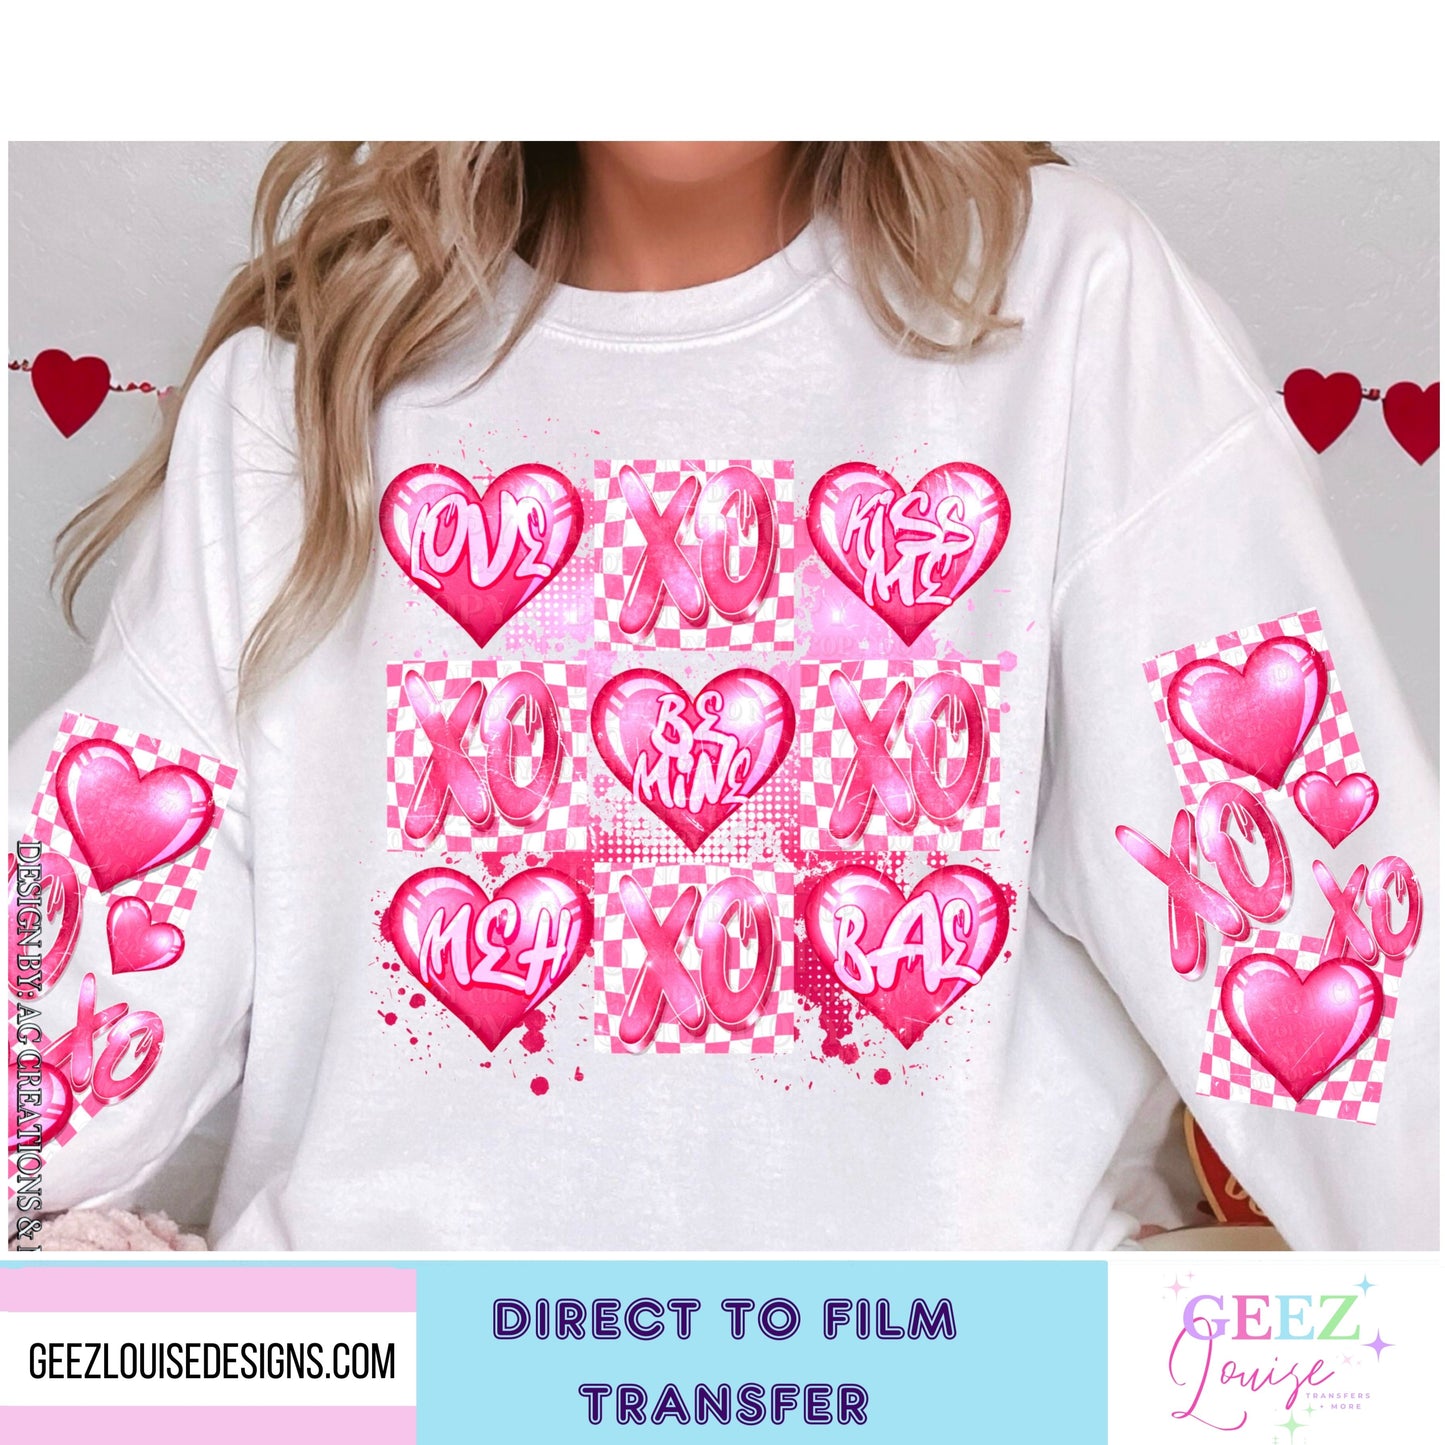 Love hearts Valentines- Direct to Film Transfer - made to order